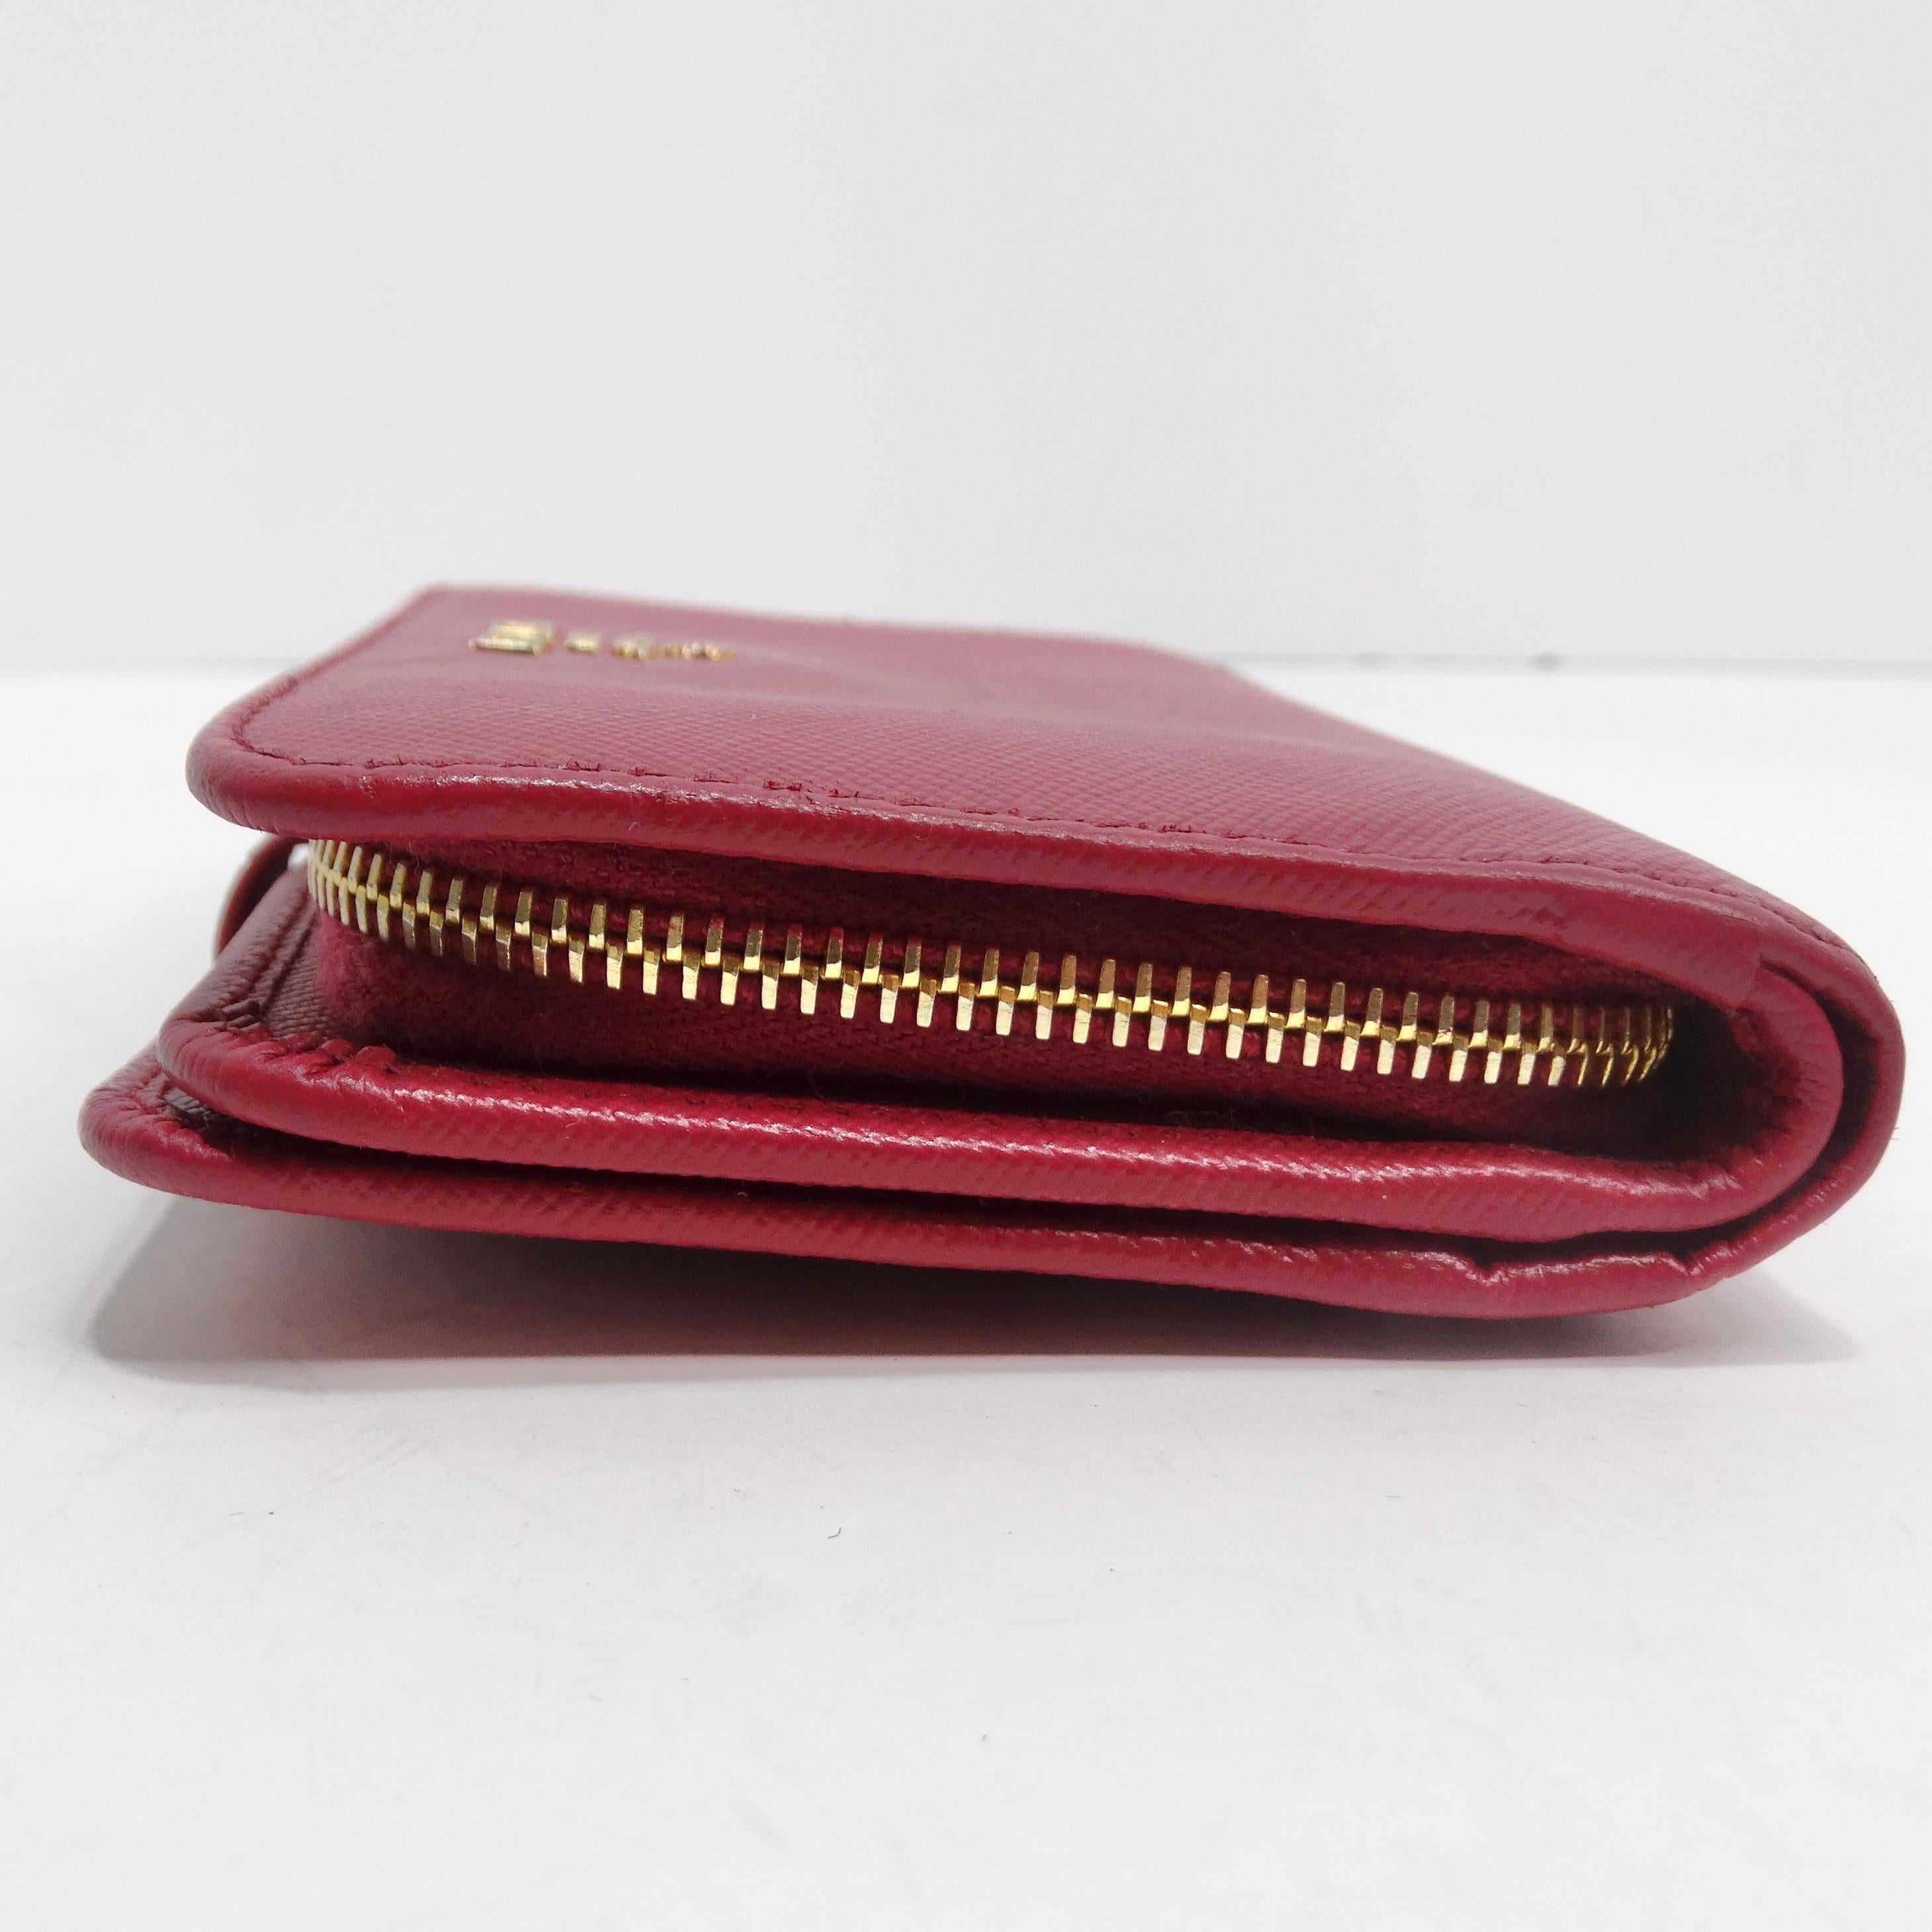 Women's or Men's Prada Saffiano Leather Compact Wallet Pink For Sale